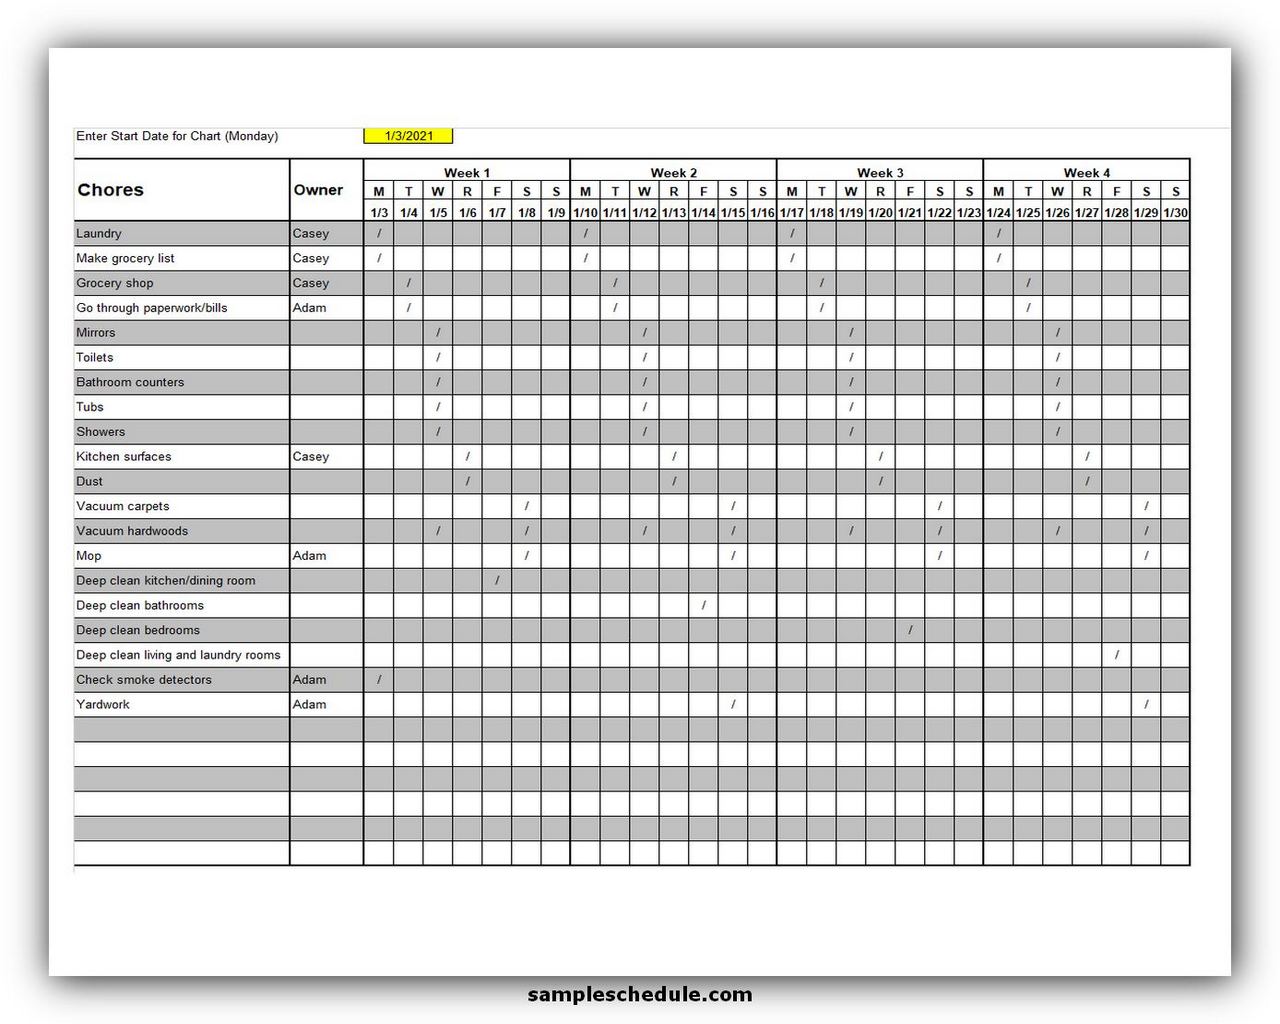 5+ Free Cleaning Checklist Template Excel - sample schedule